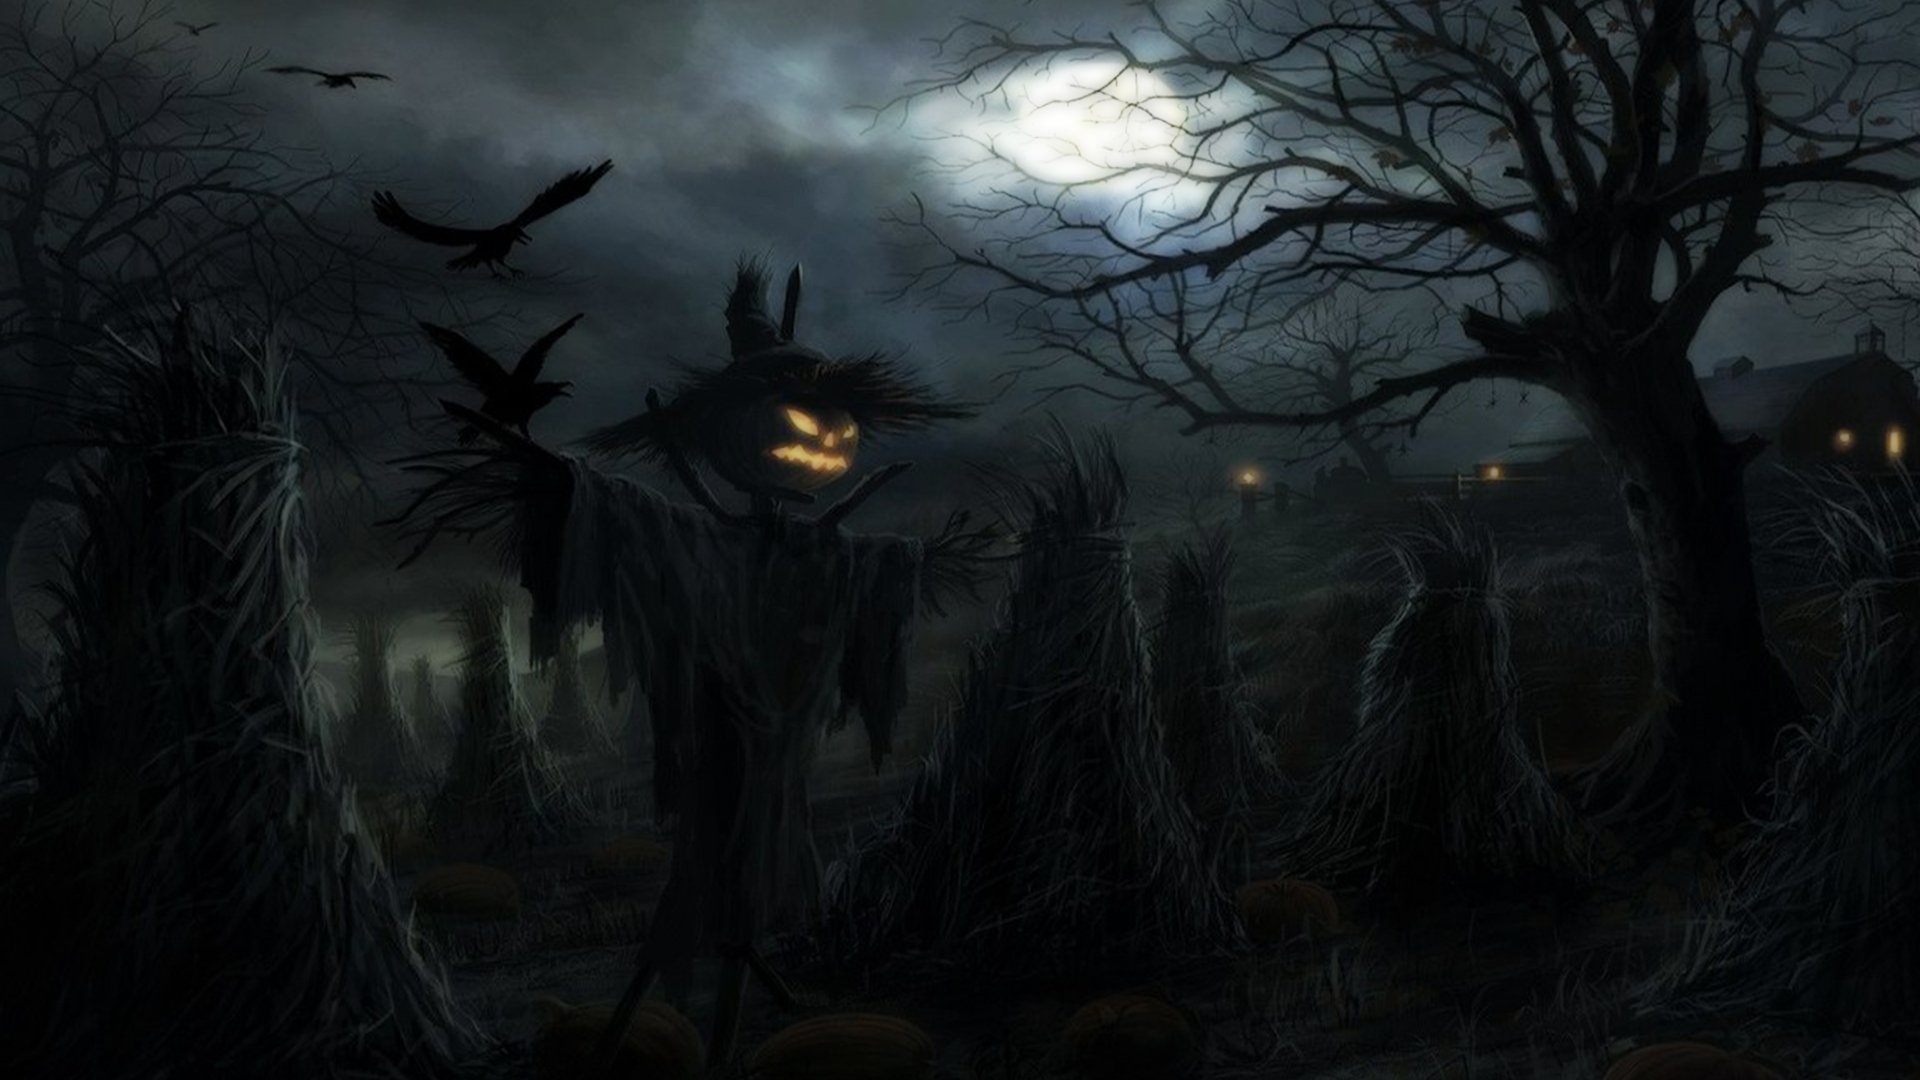 Free Download Scary Halloween Backgrounds 1920x1080